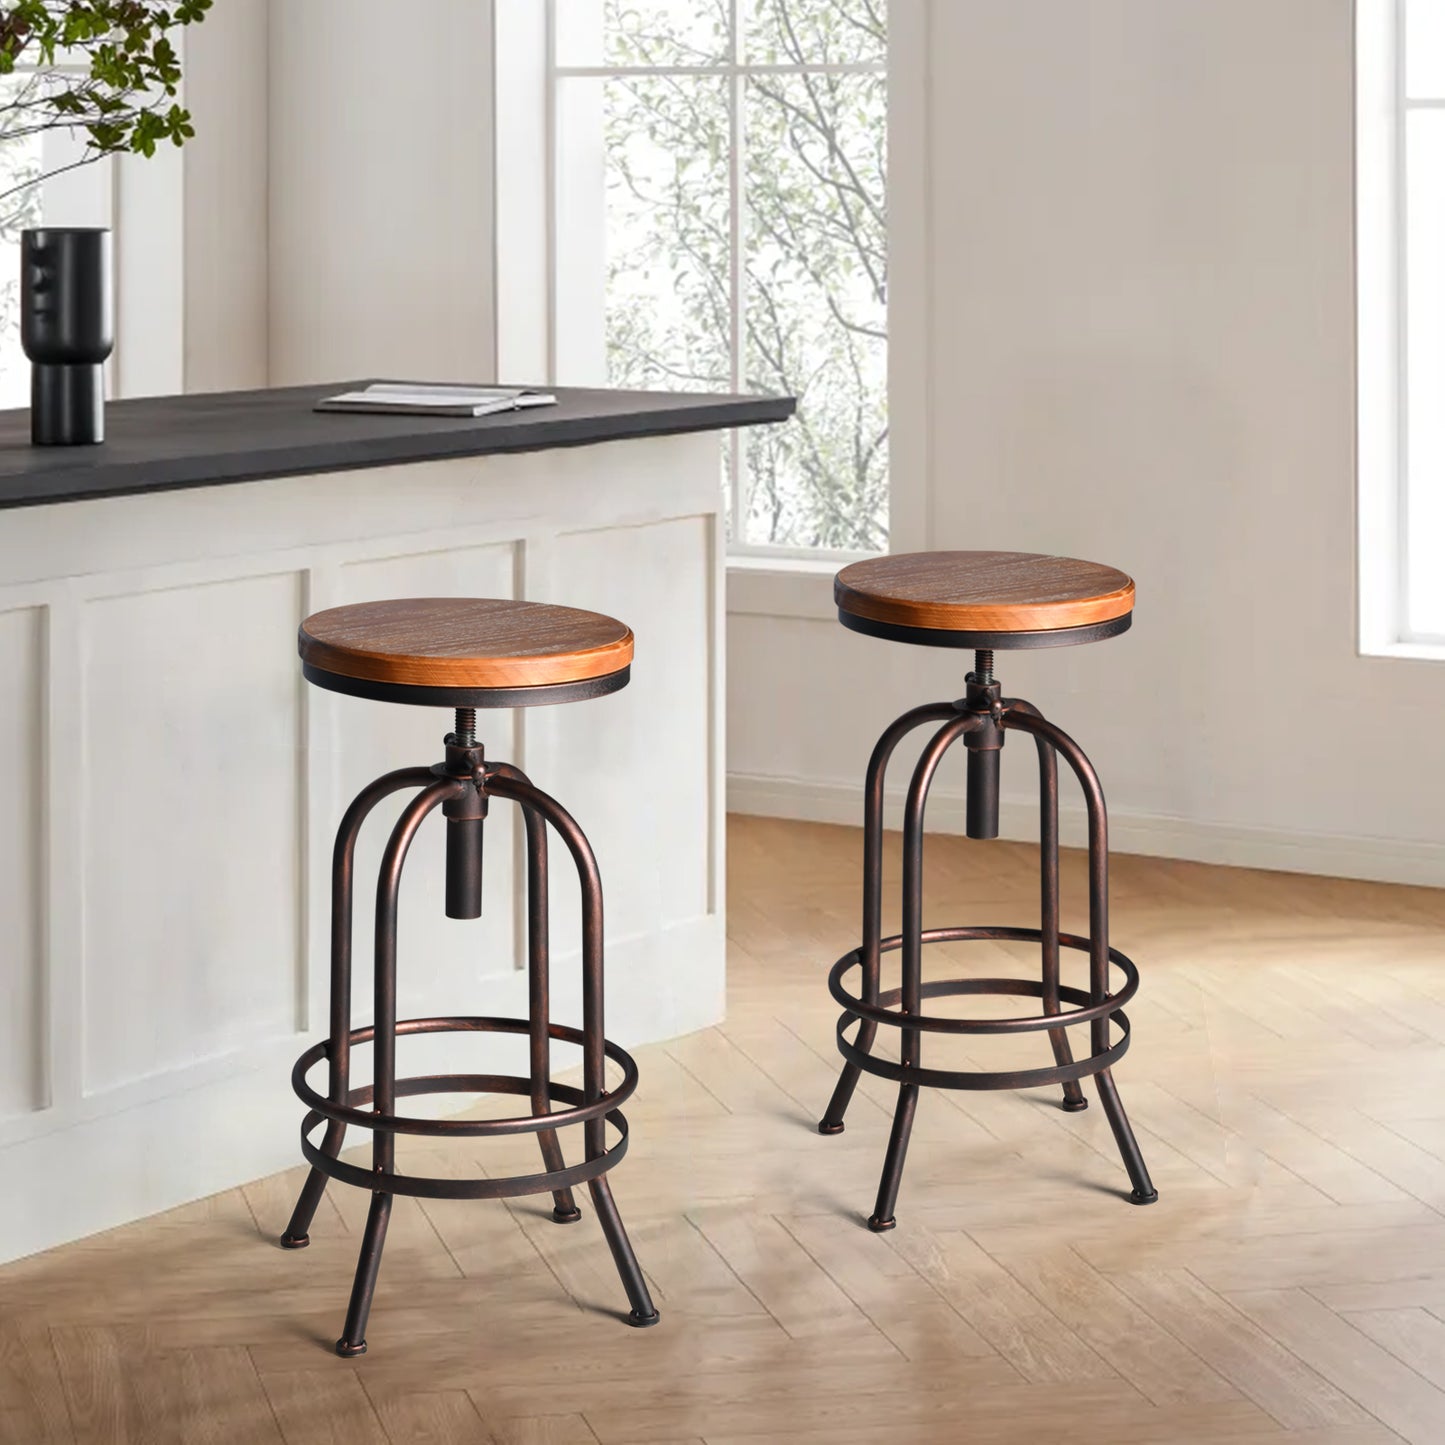 SET OF 2,32 inch Vintage Industrial Bar Stool-Metal Wood Swivel Bar Stool-Retro Bar Height Stool-Counter Height Adjustable Kitchen Stools-Set of 2-Extra Tall Pub Height 26-32 Inch,Fully Welded